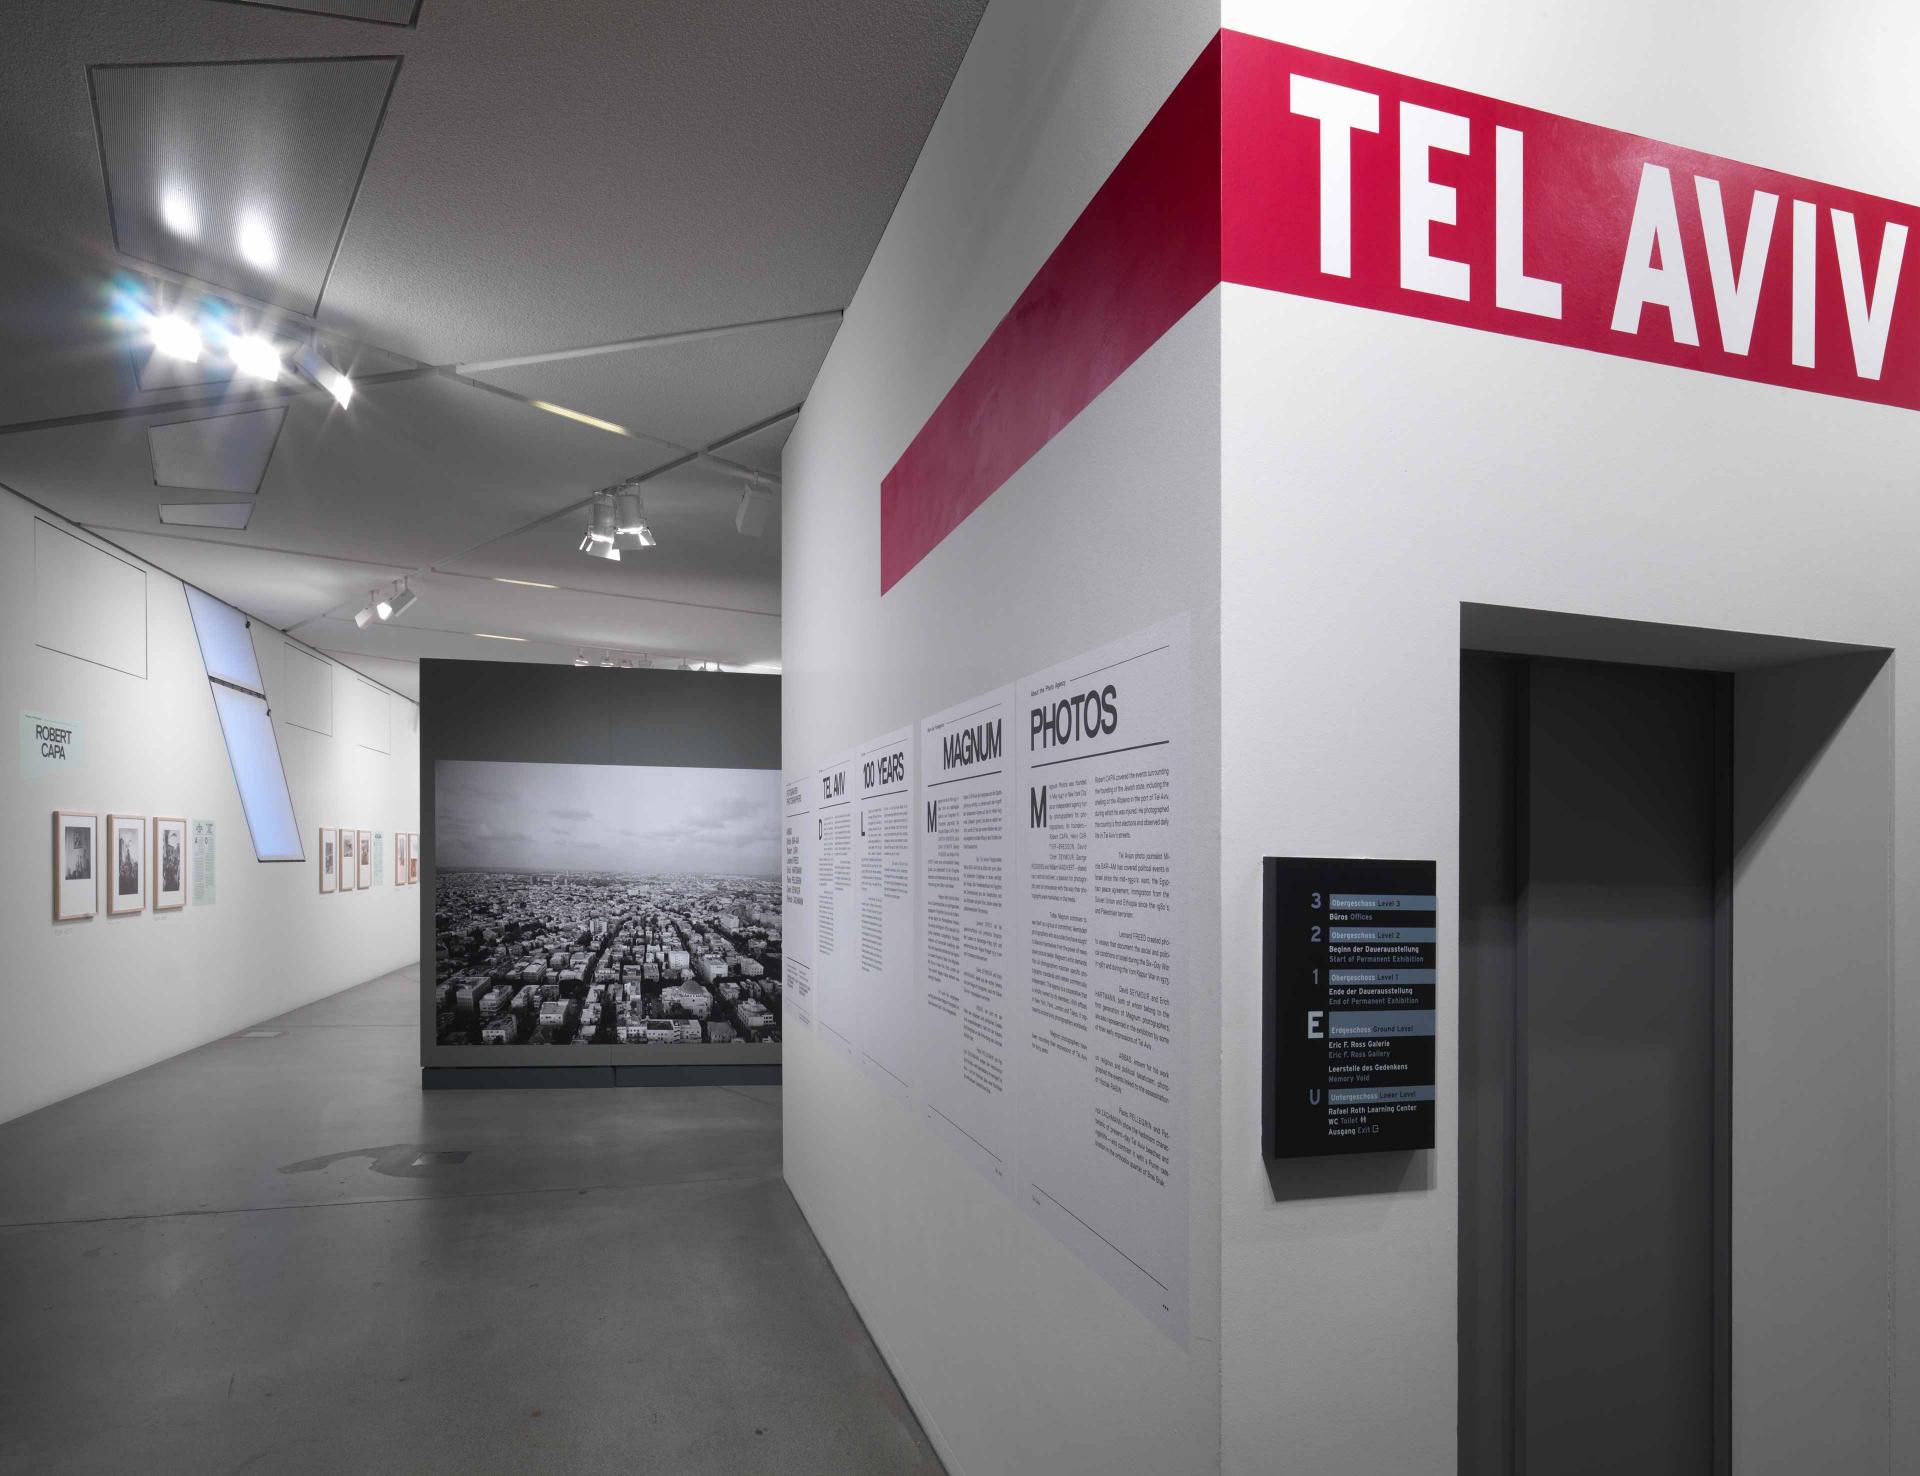 View into the entrance area of the exhibition: On the right a wall with lettering, in the background a large black-and-white photo showing an aerial view of a city